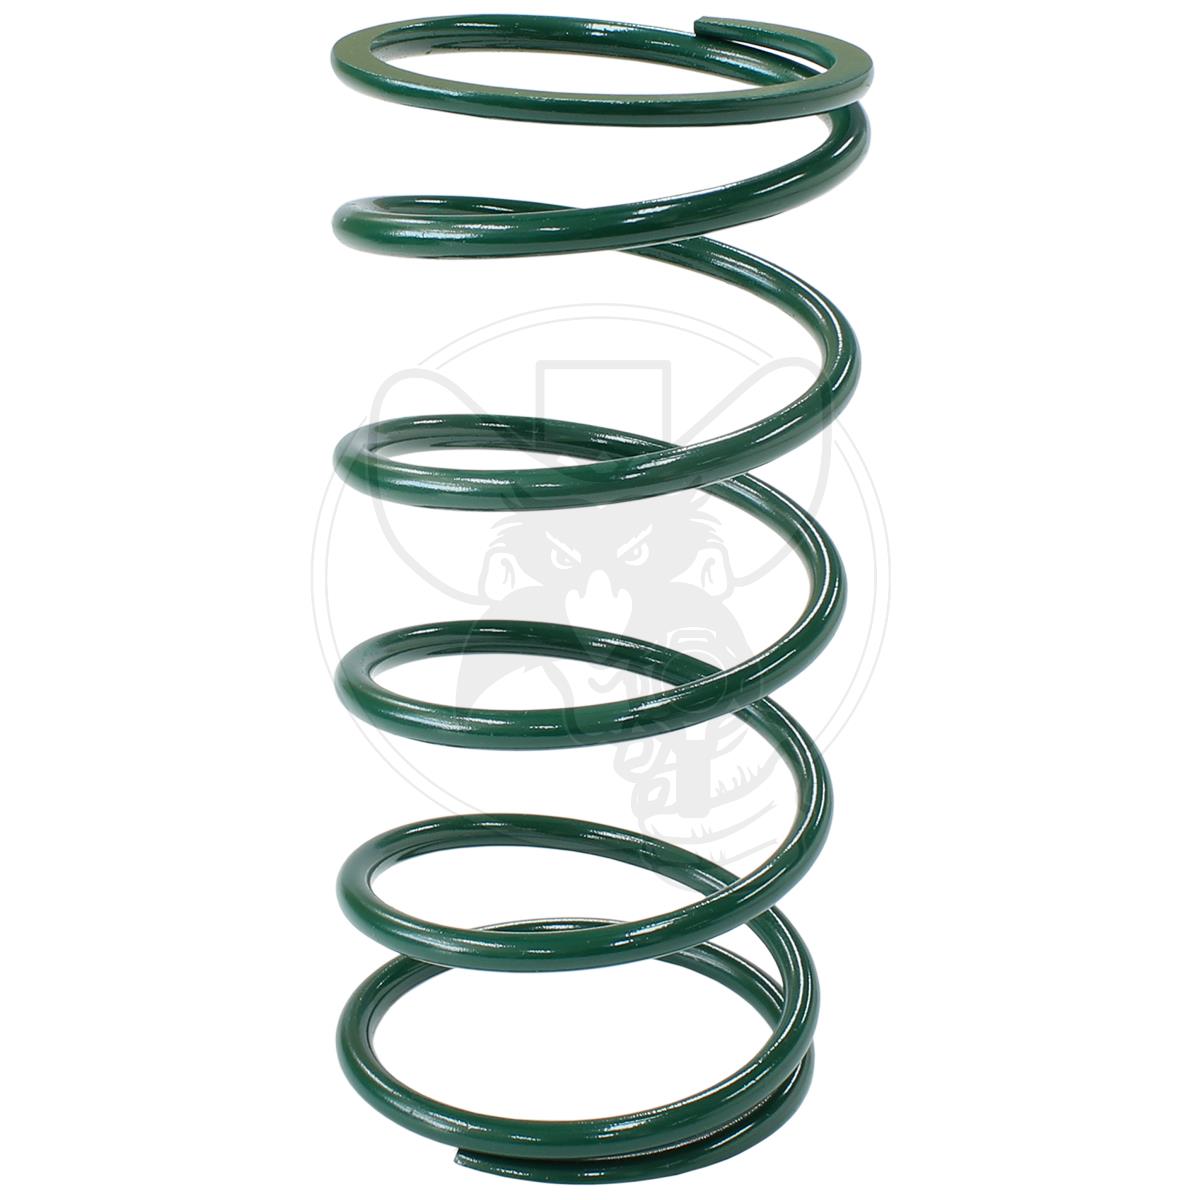 AEROFLOW WASTEGATE OUTER SPRING FROM 14.35 PSI (0.98 BAR) - GREEN